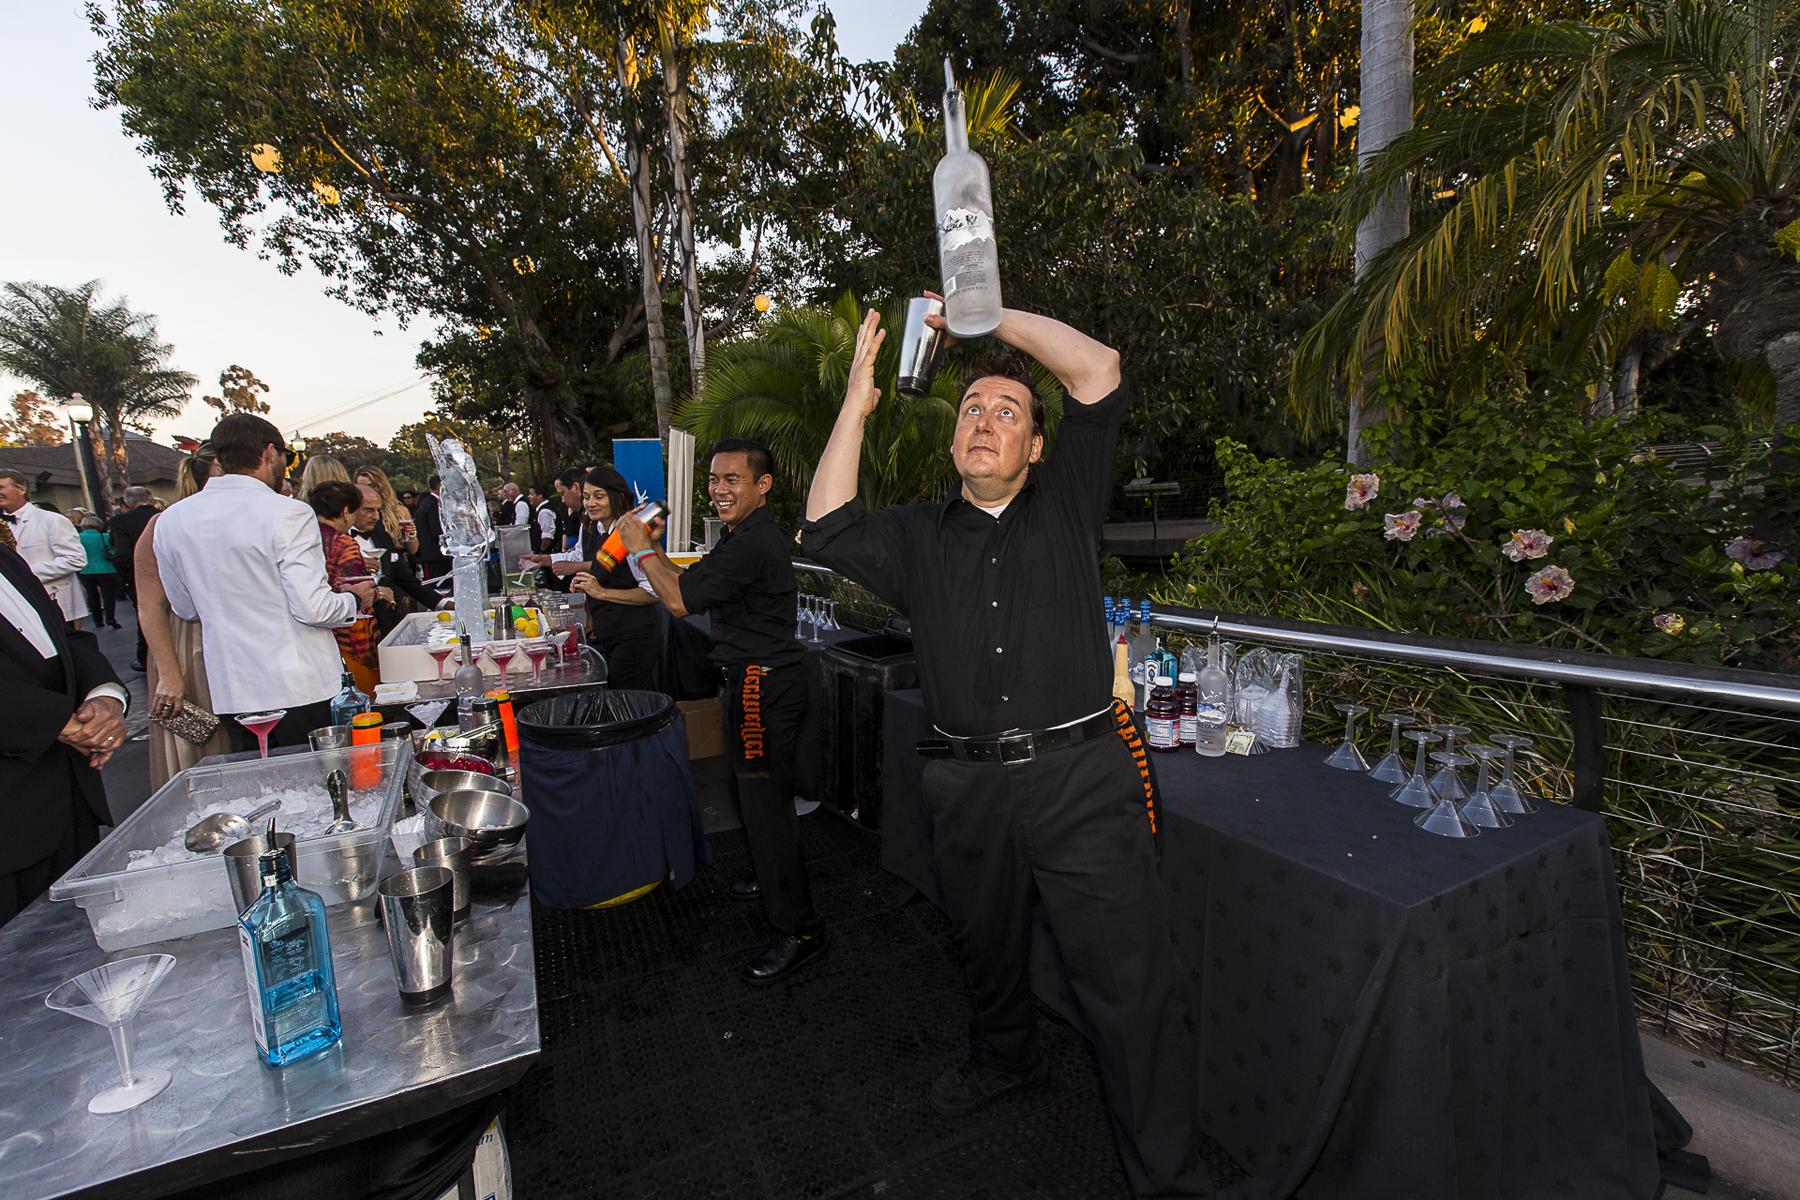 Professional Bartenders Serving with Flair